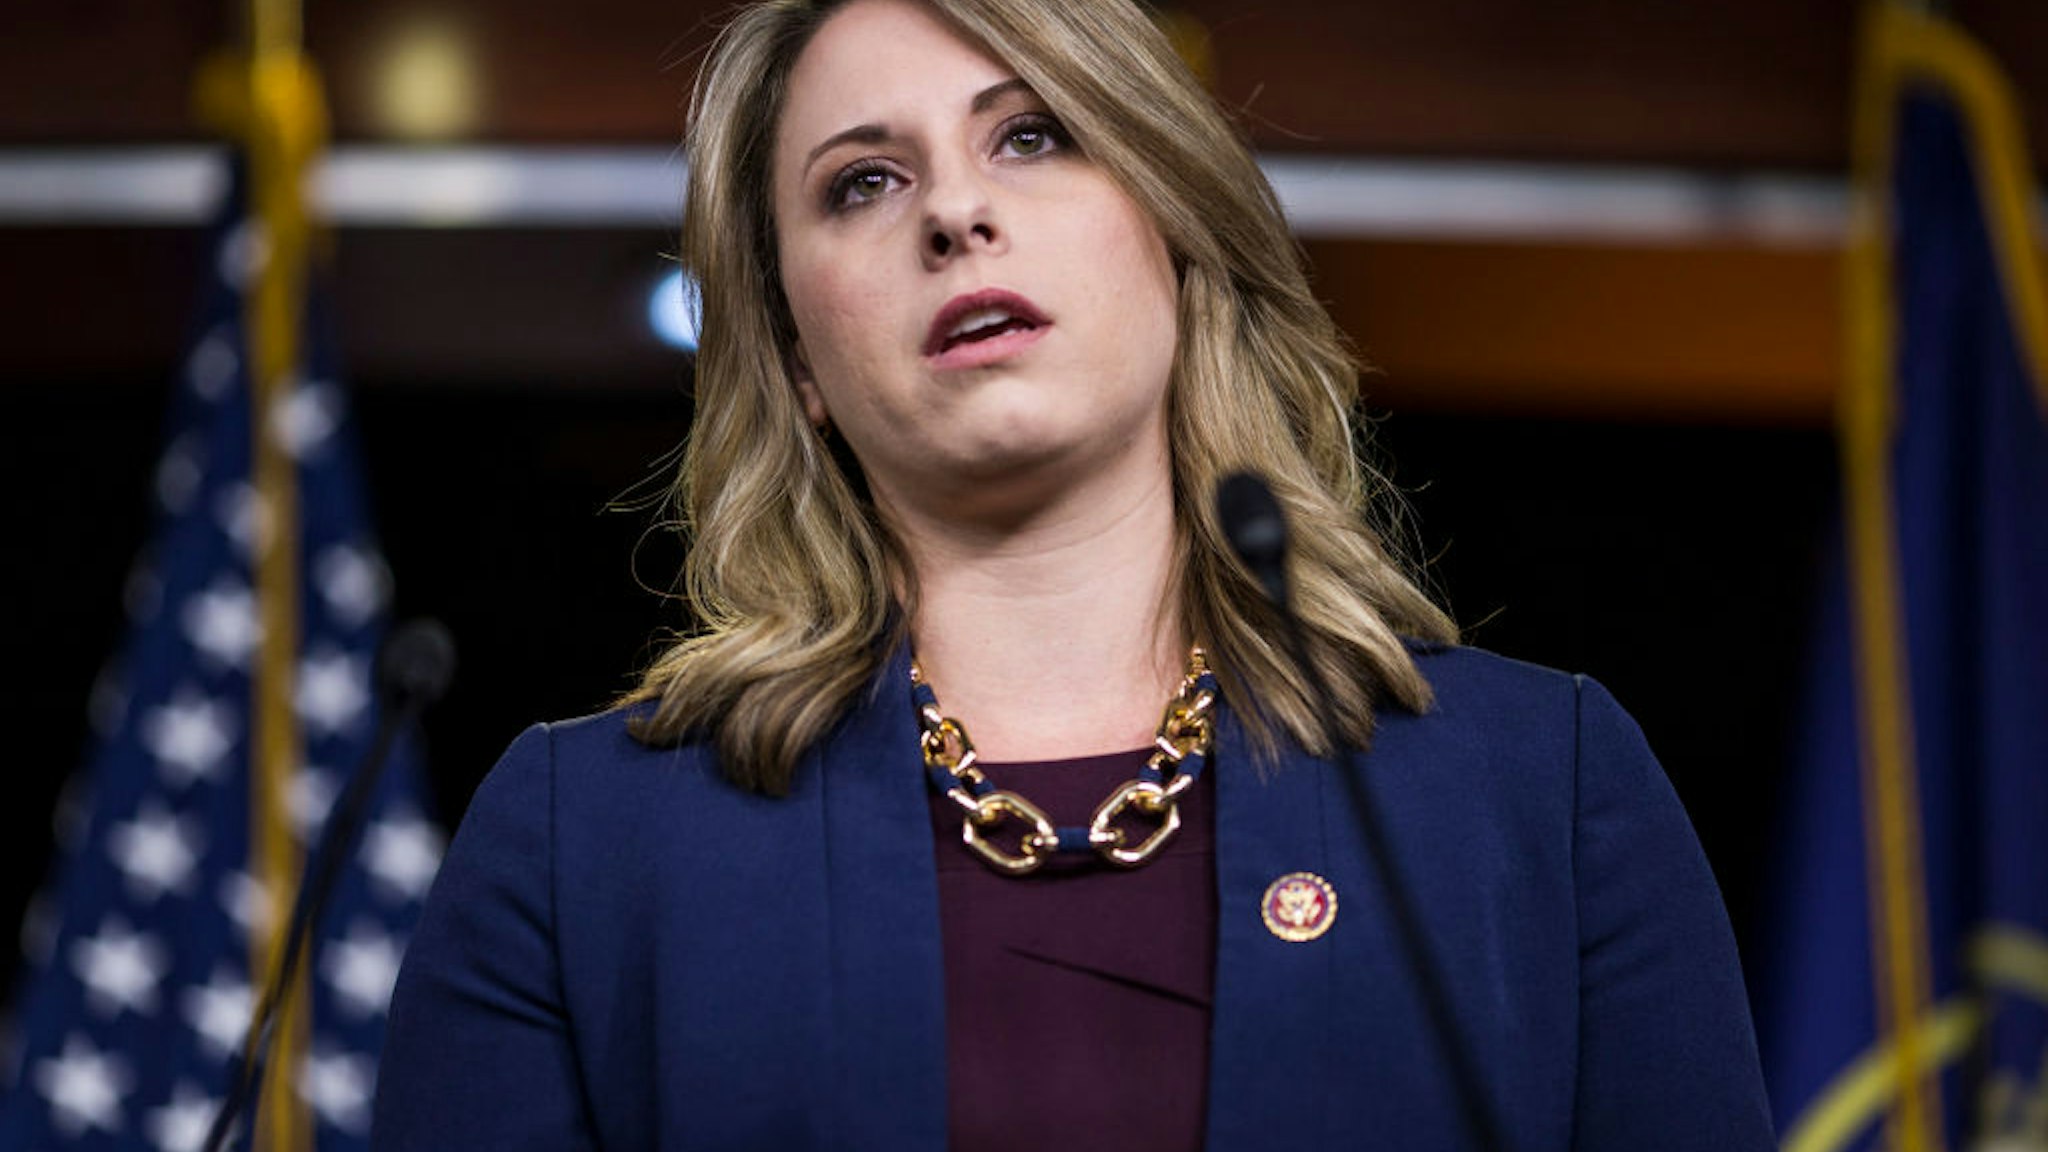 Rep. Katie Hill speaks during a news conference